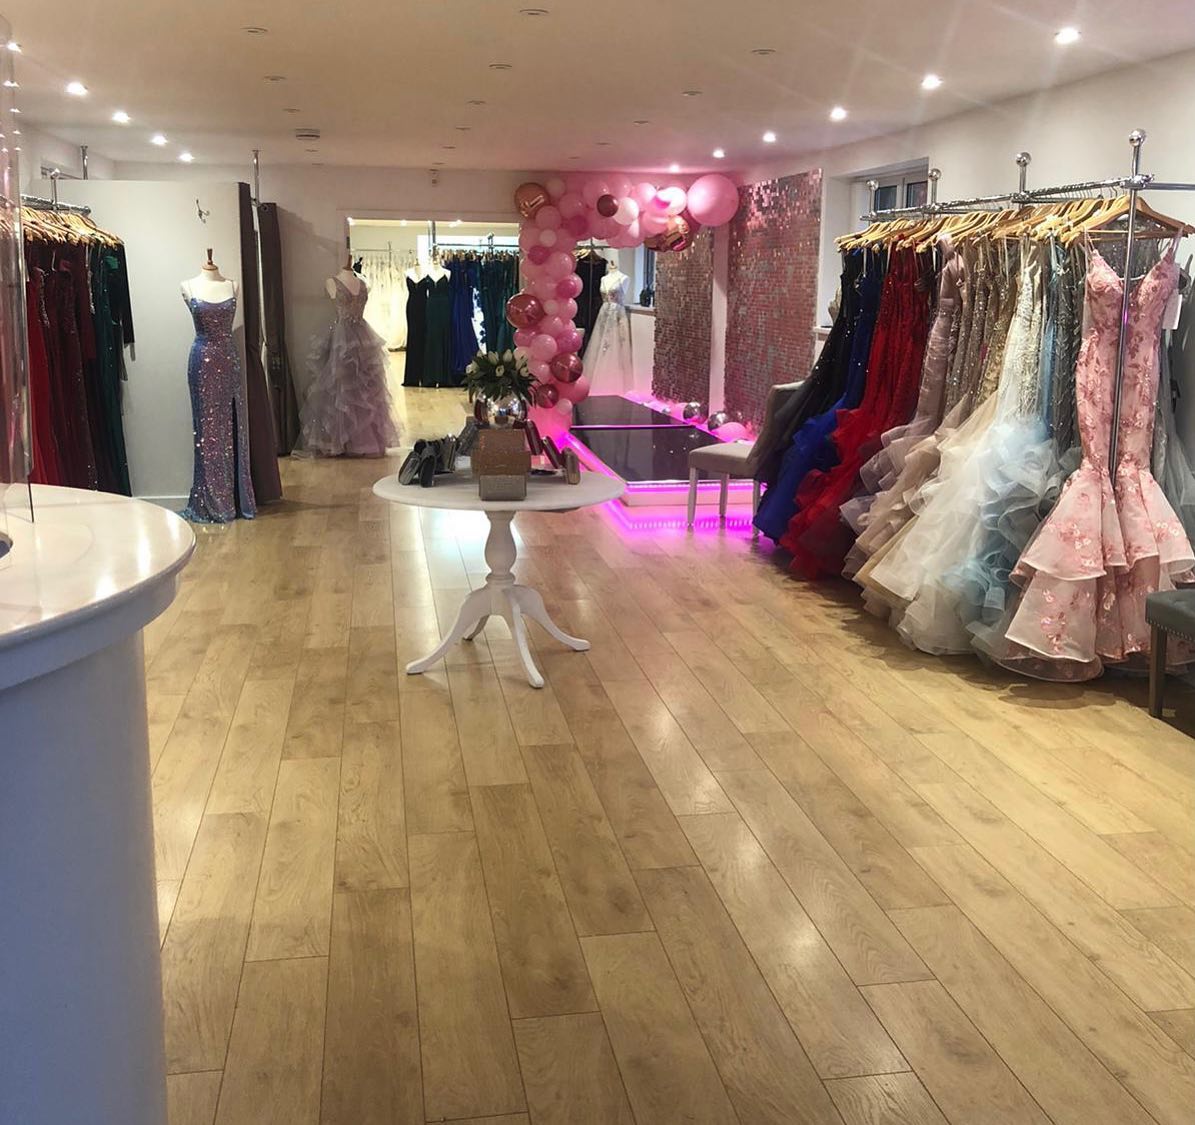 prom dress stores